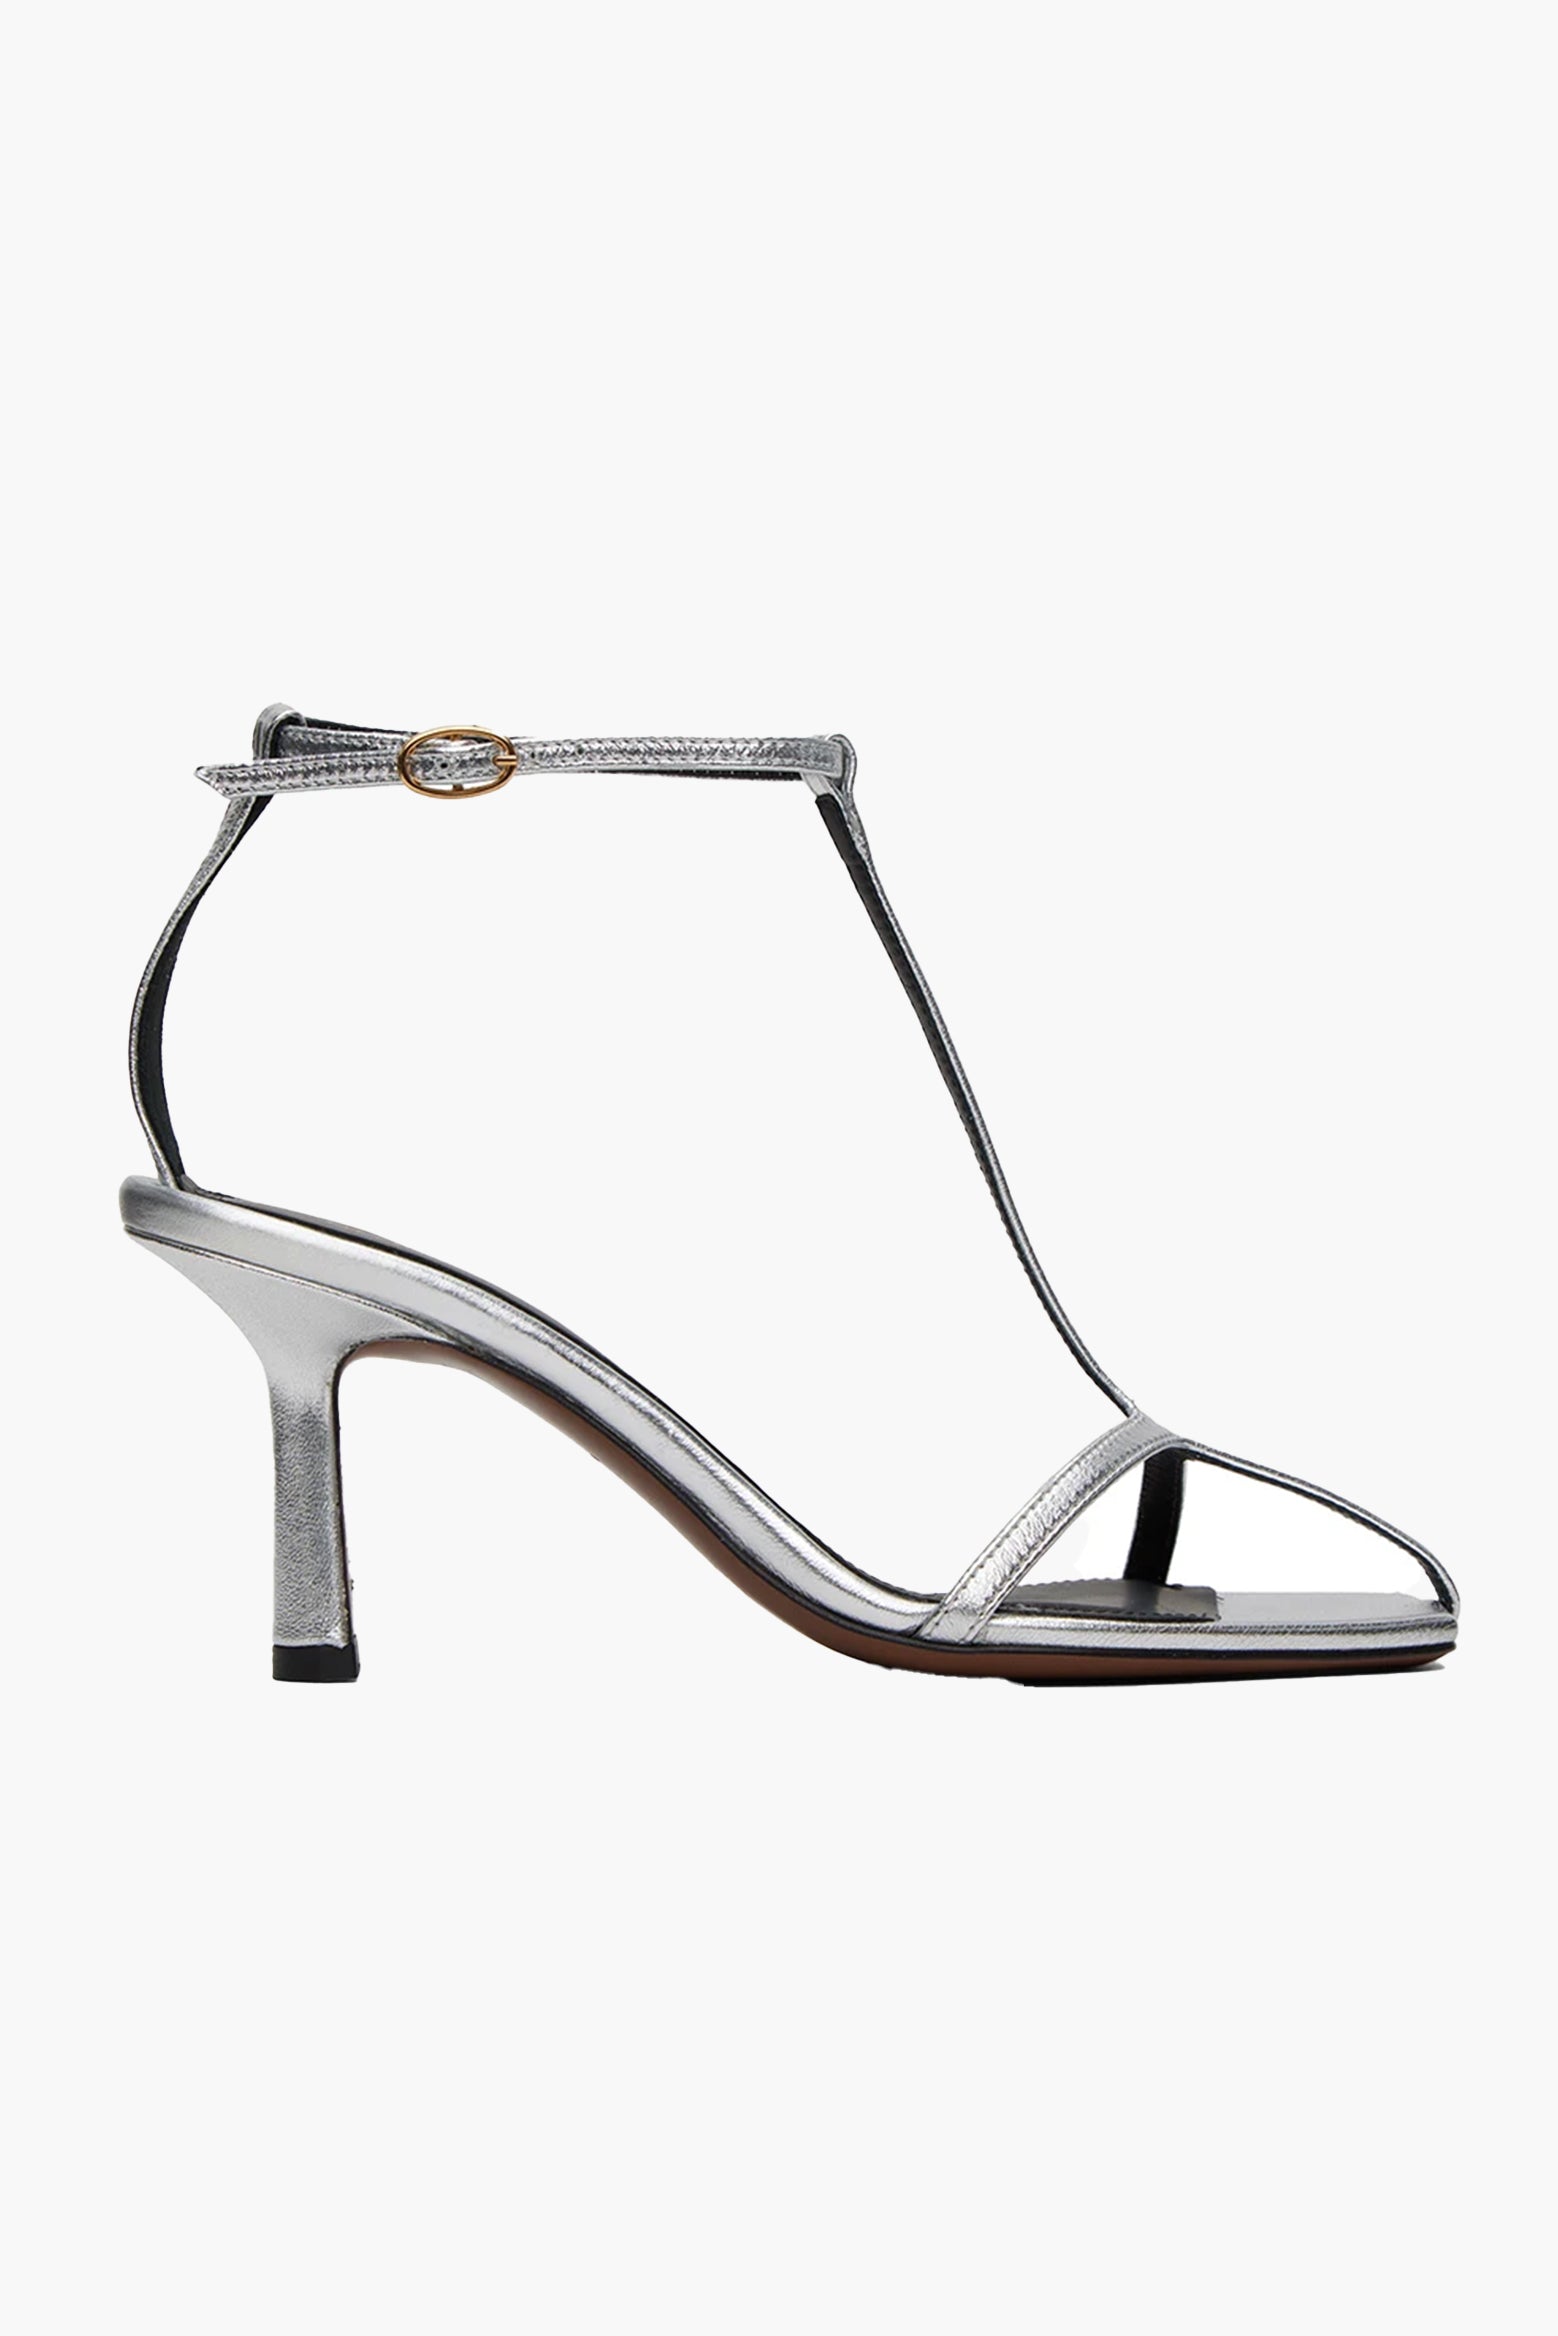 Neous Jumel Leather Sandals in Silver available at The New Trend Australia.